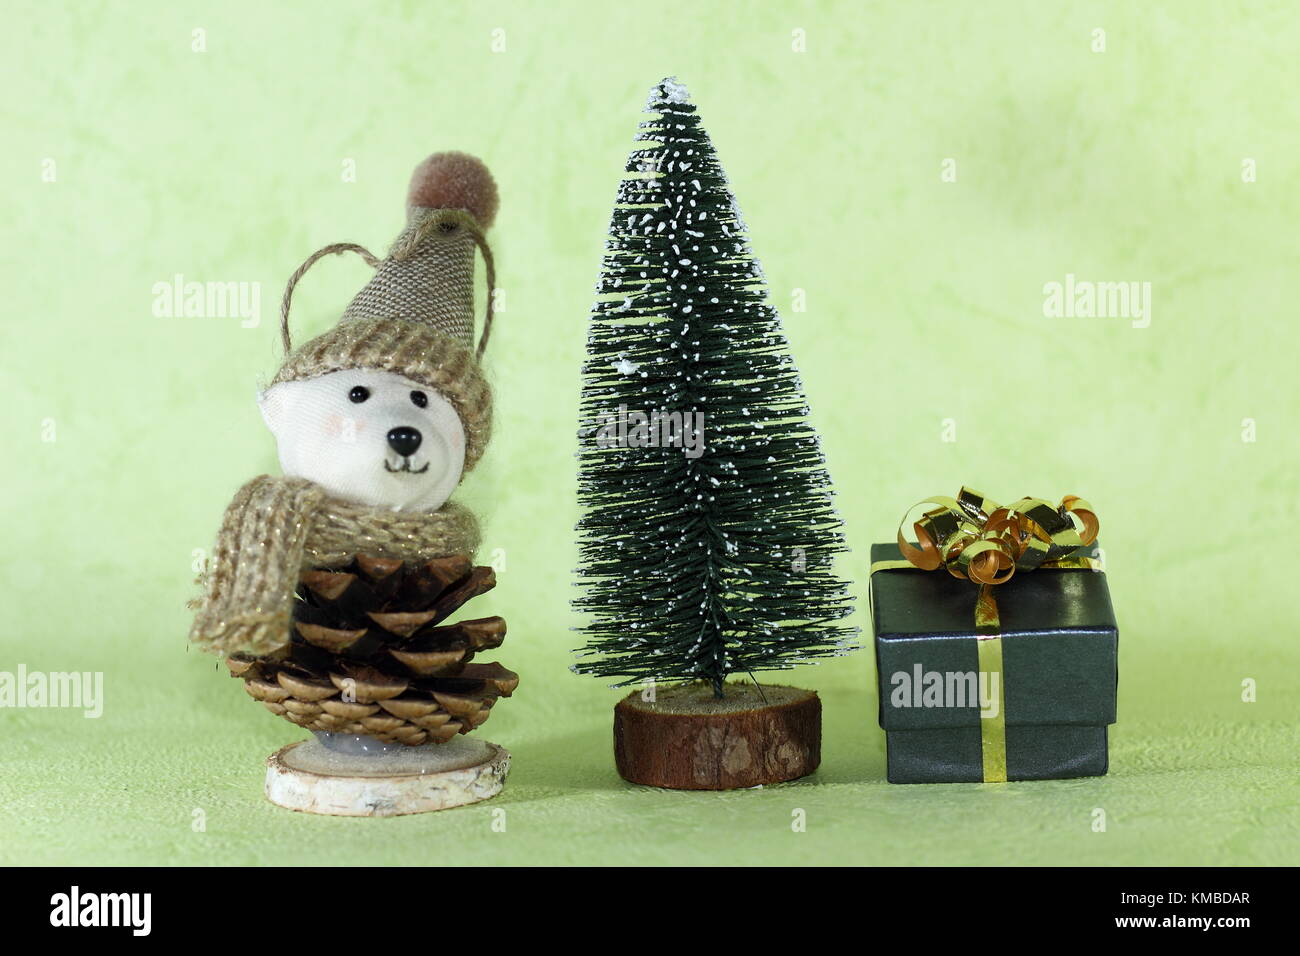 a small gift and a toy bear with a hat next to a decorative chrismas tree on a green background Stock Photo